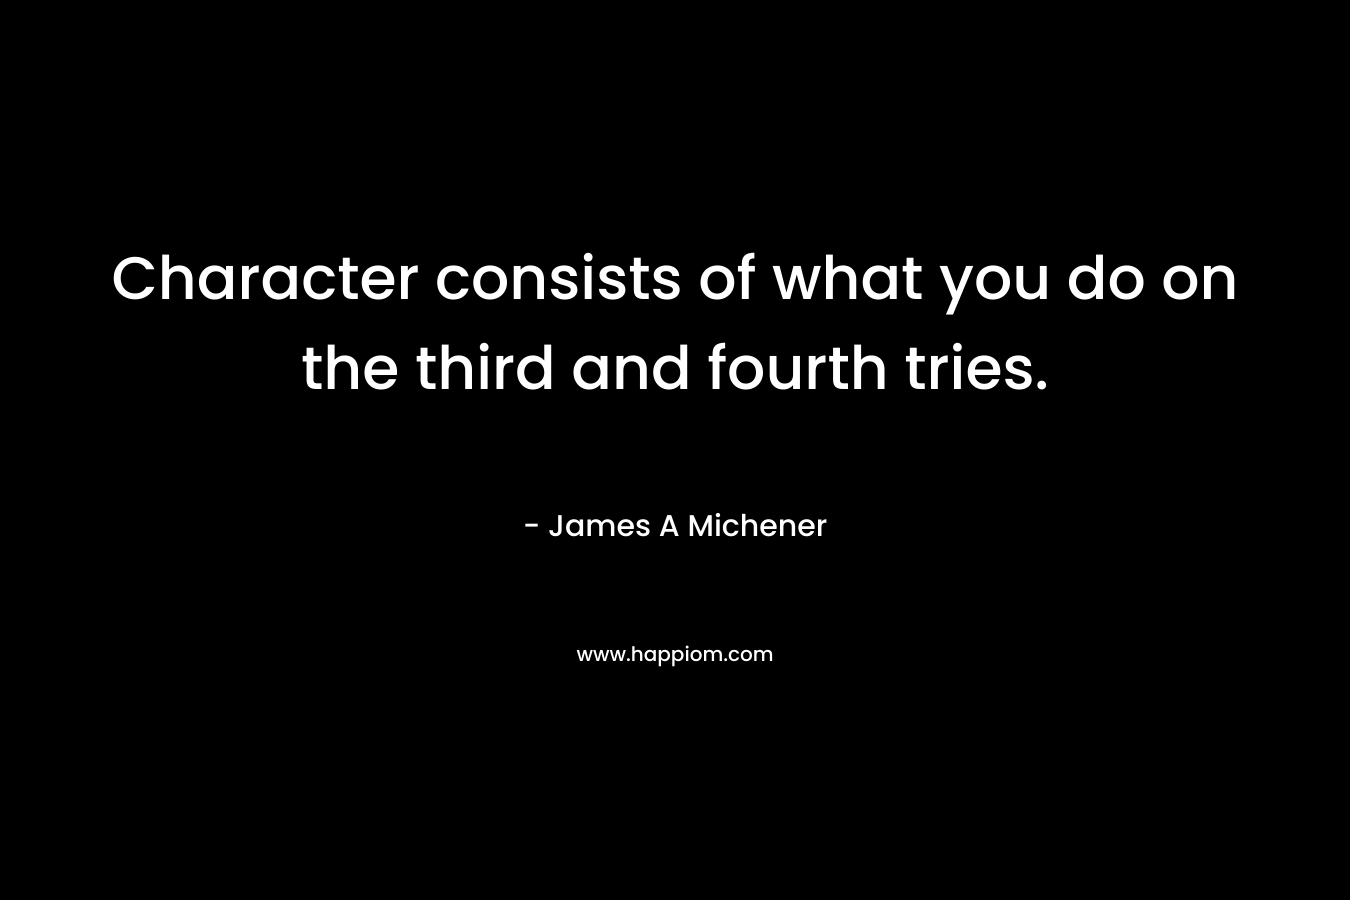 Character consists of what you do on the third and fourth tries. – James A Michener